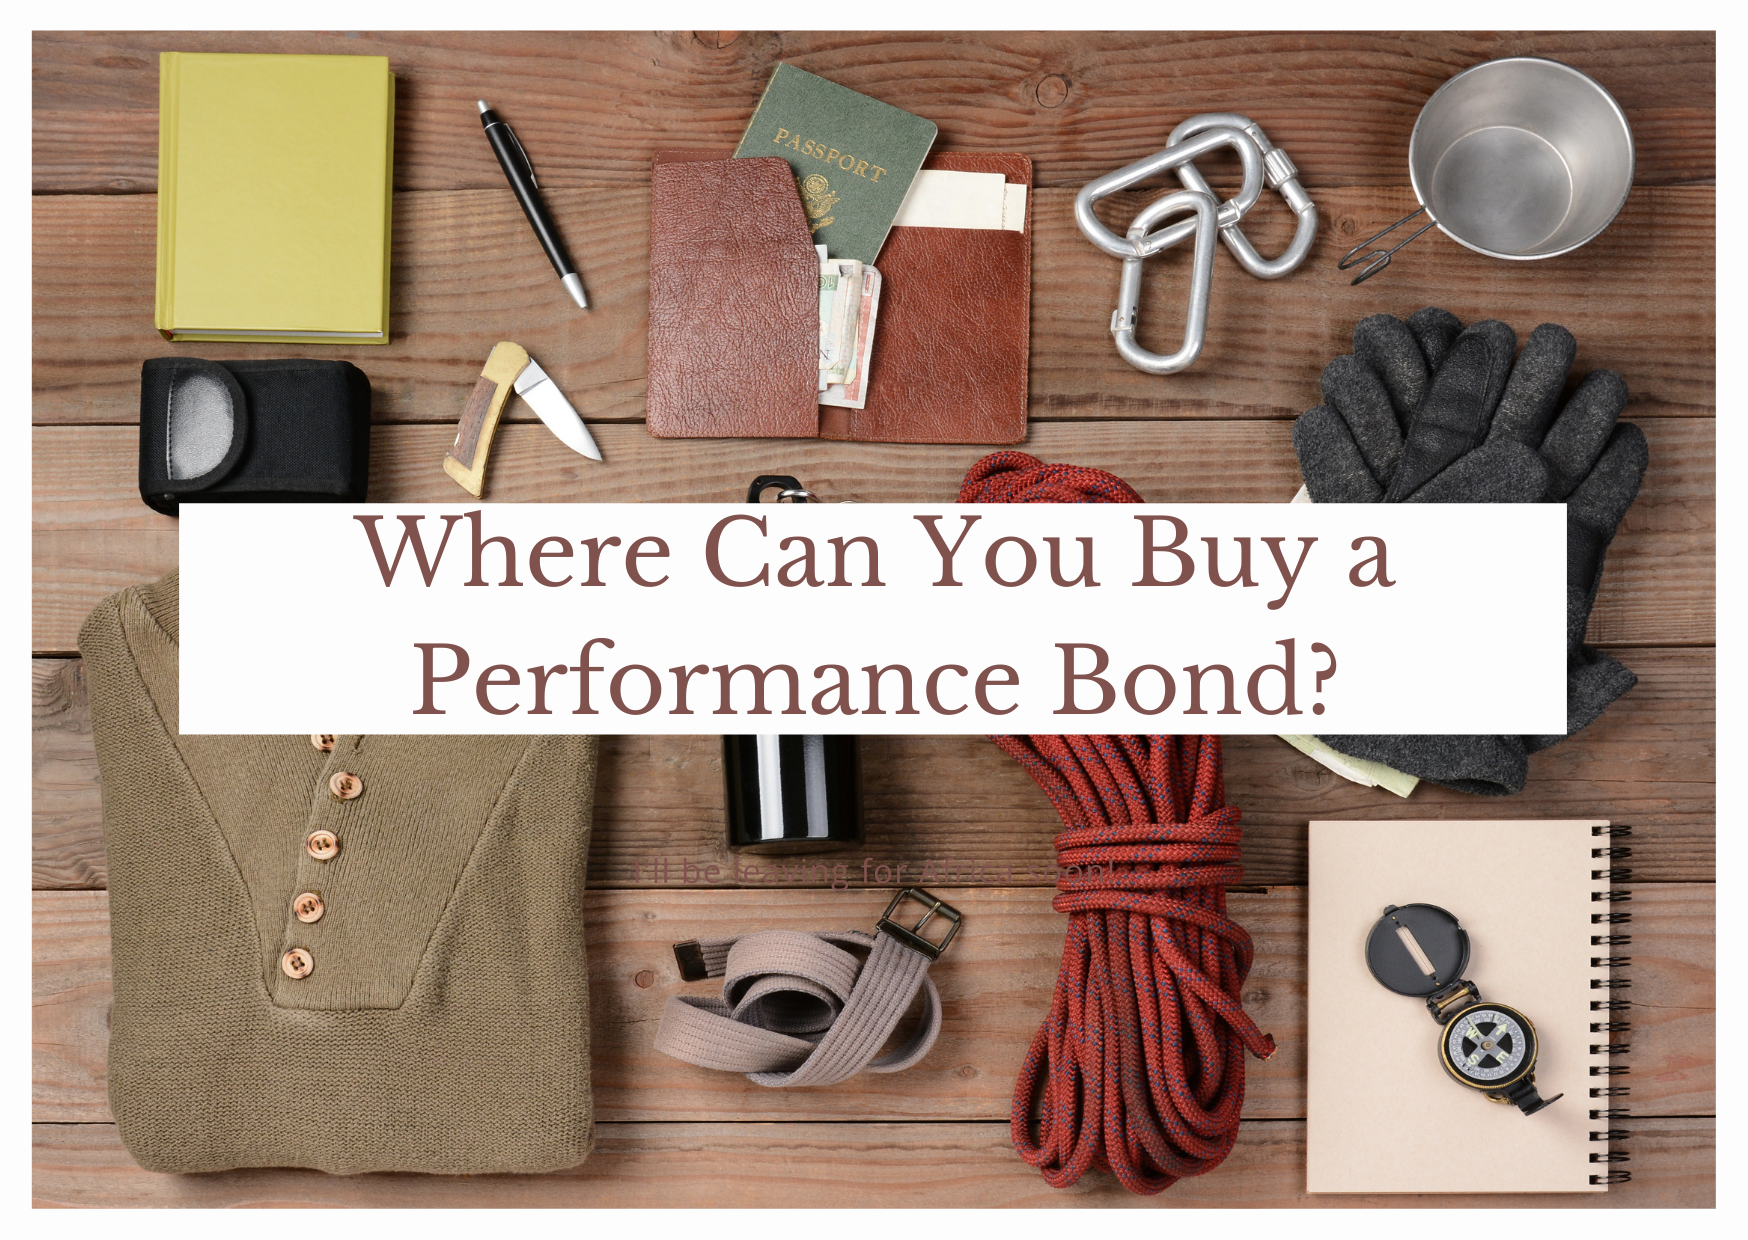 performance bond - erformance Bonds are issued by who - different construction things 